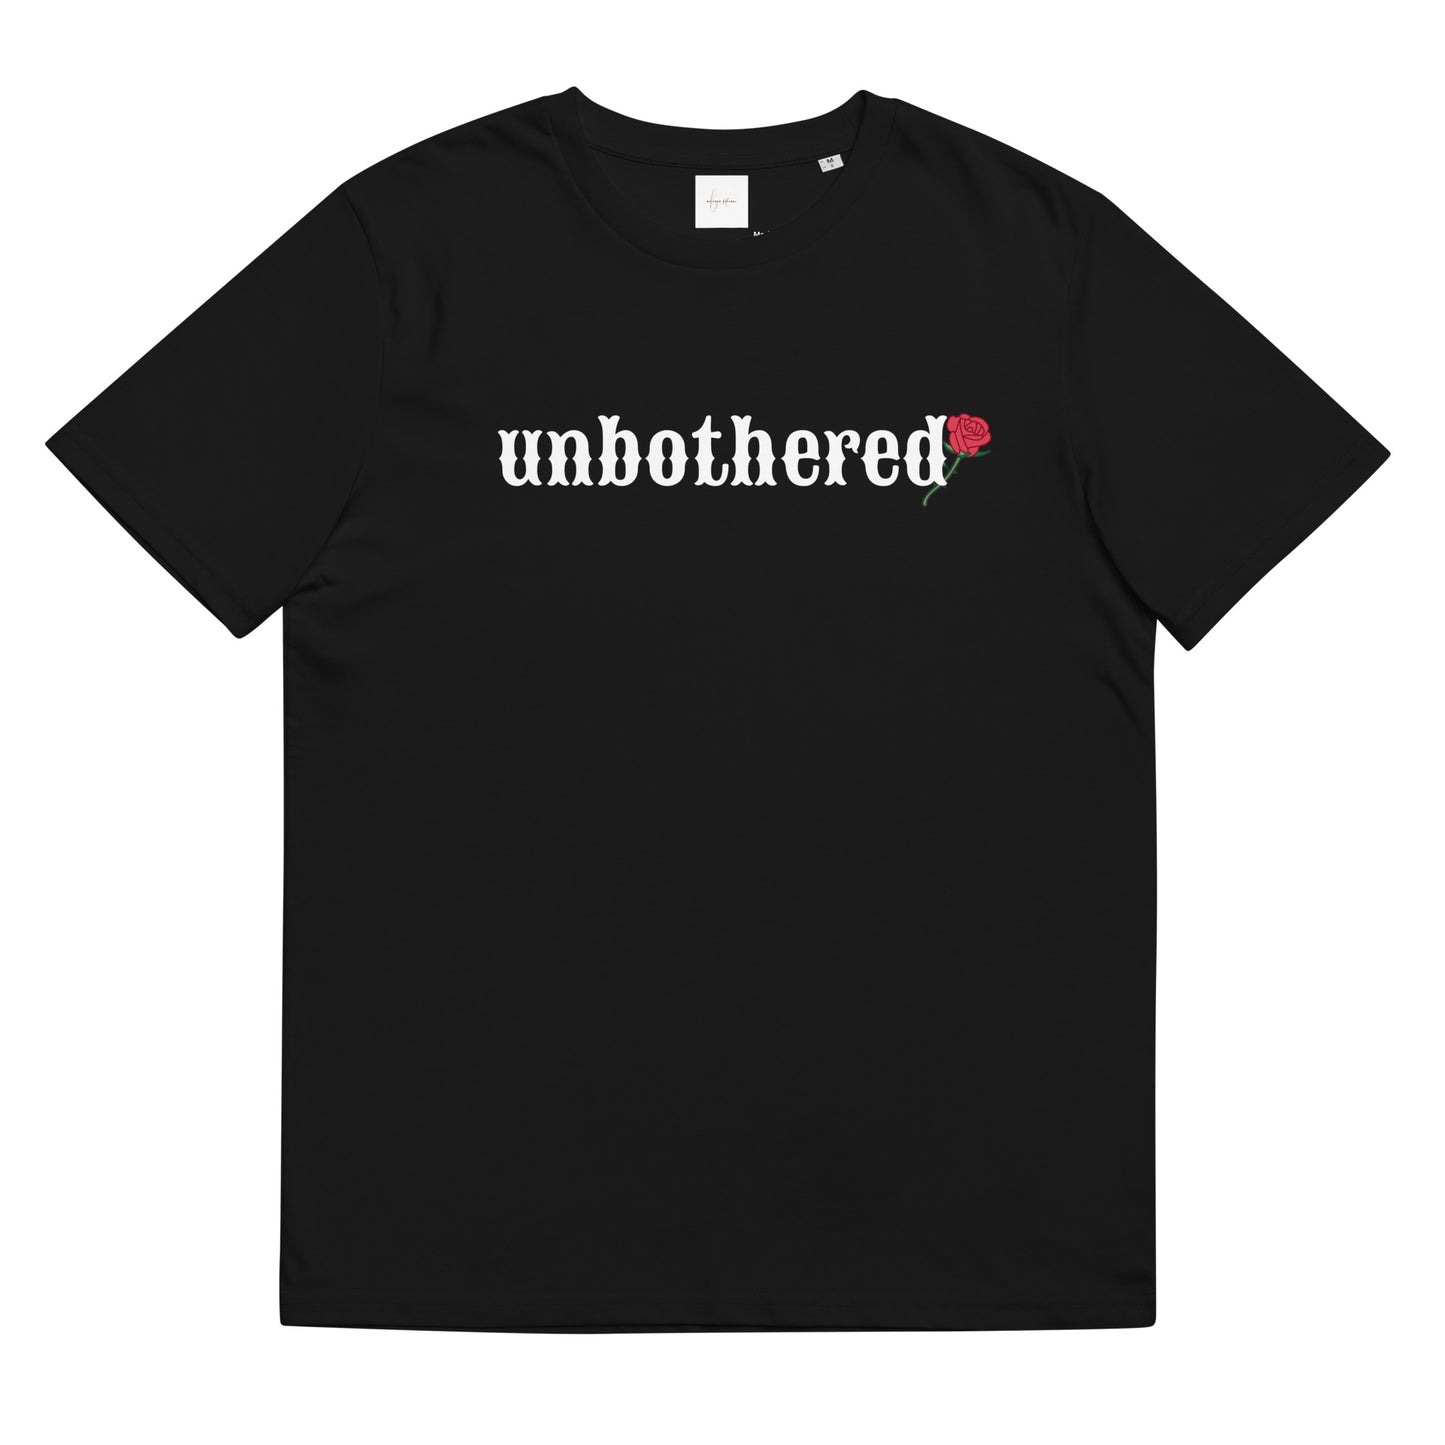 Unbothered Red Rose - Black T-shirt.